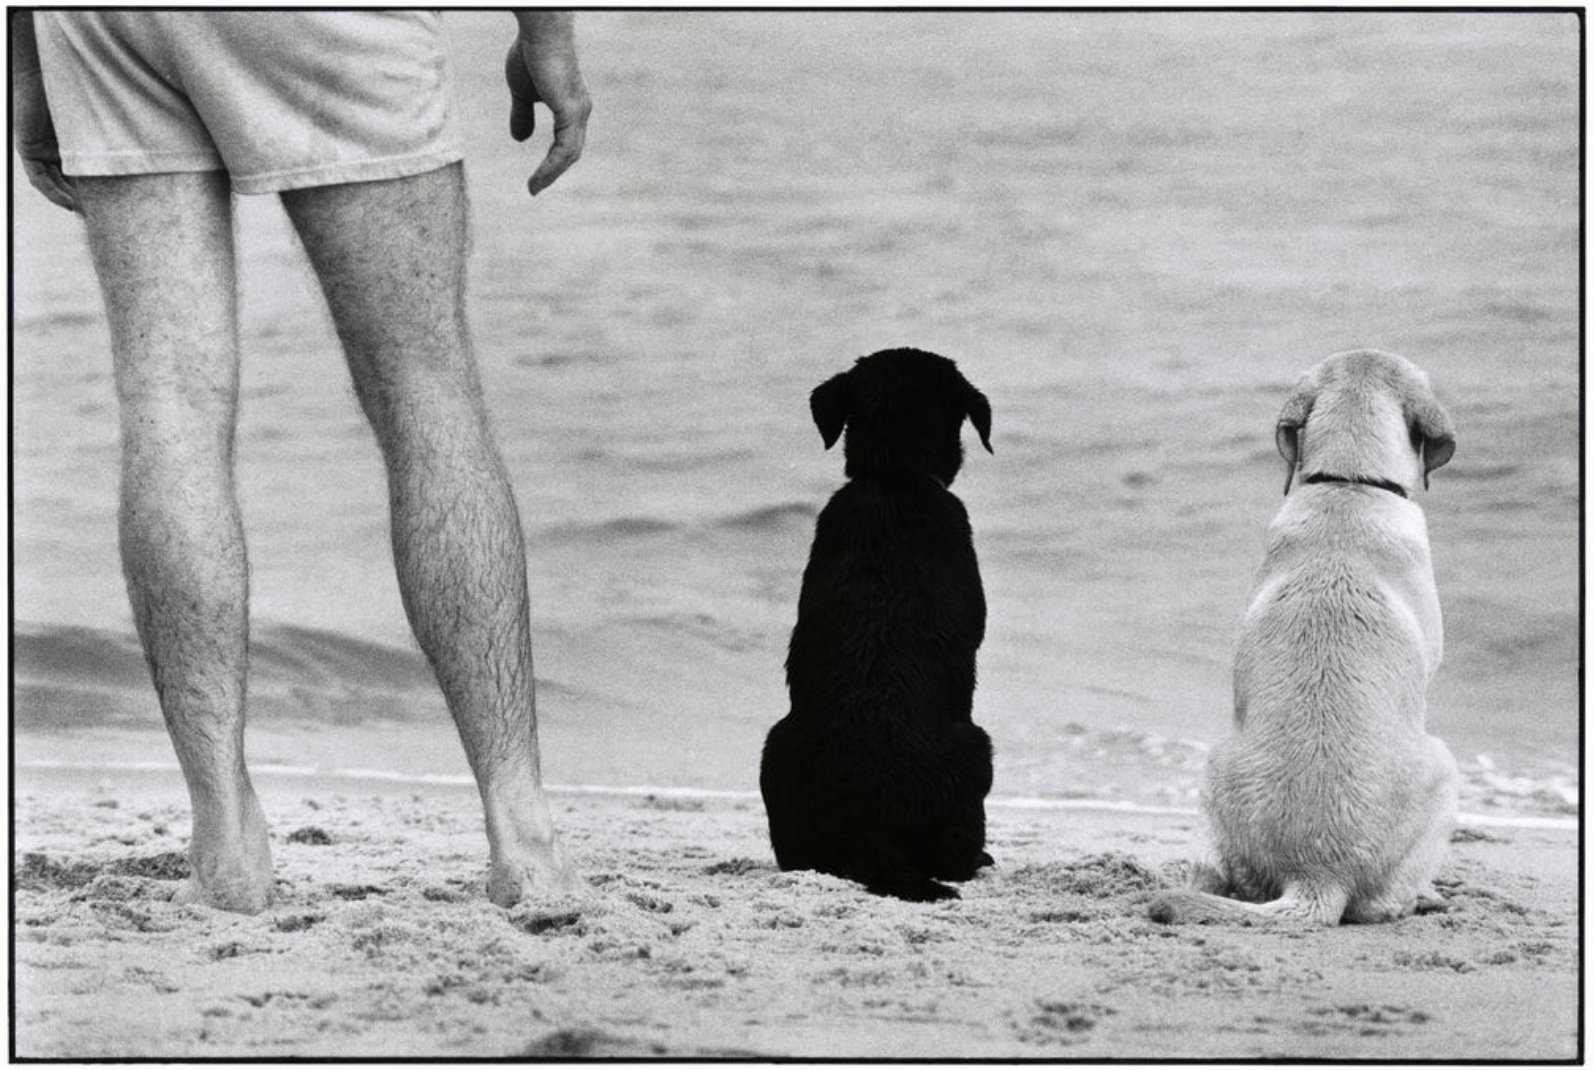 Candid view of two dogs and a person standing on the beach looking at the water